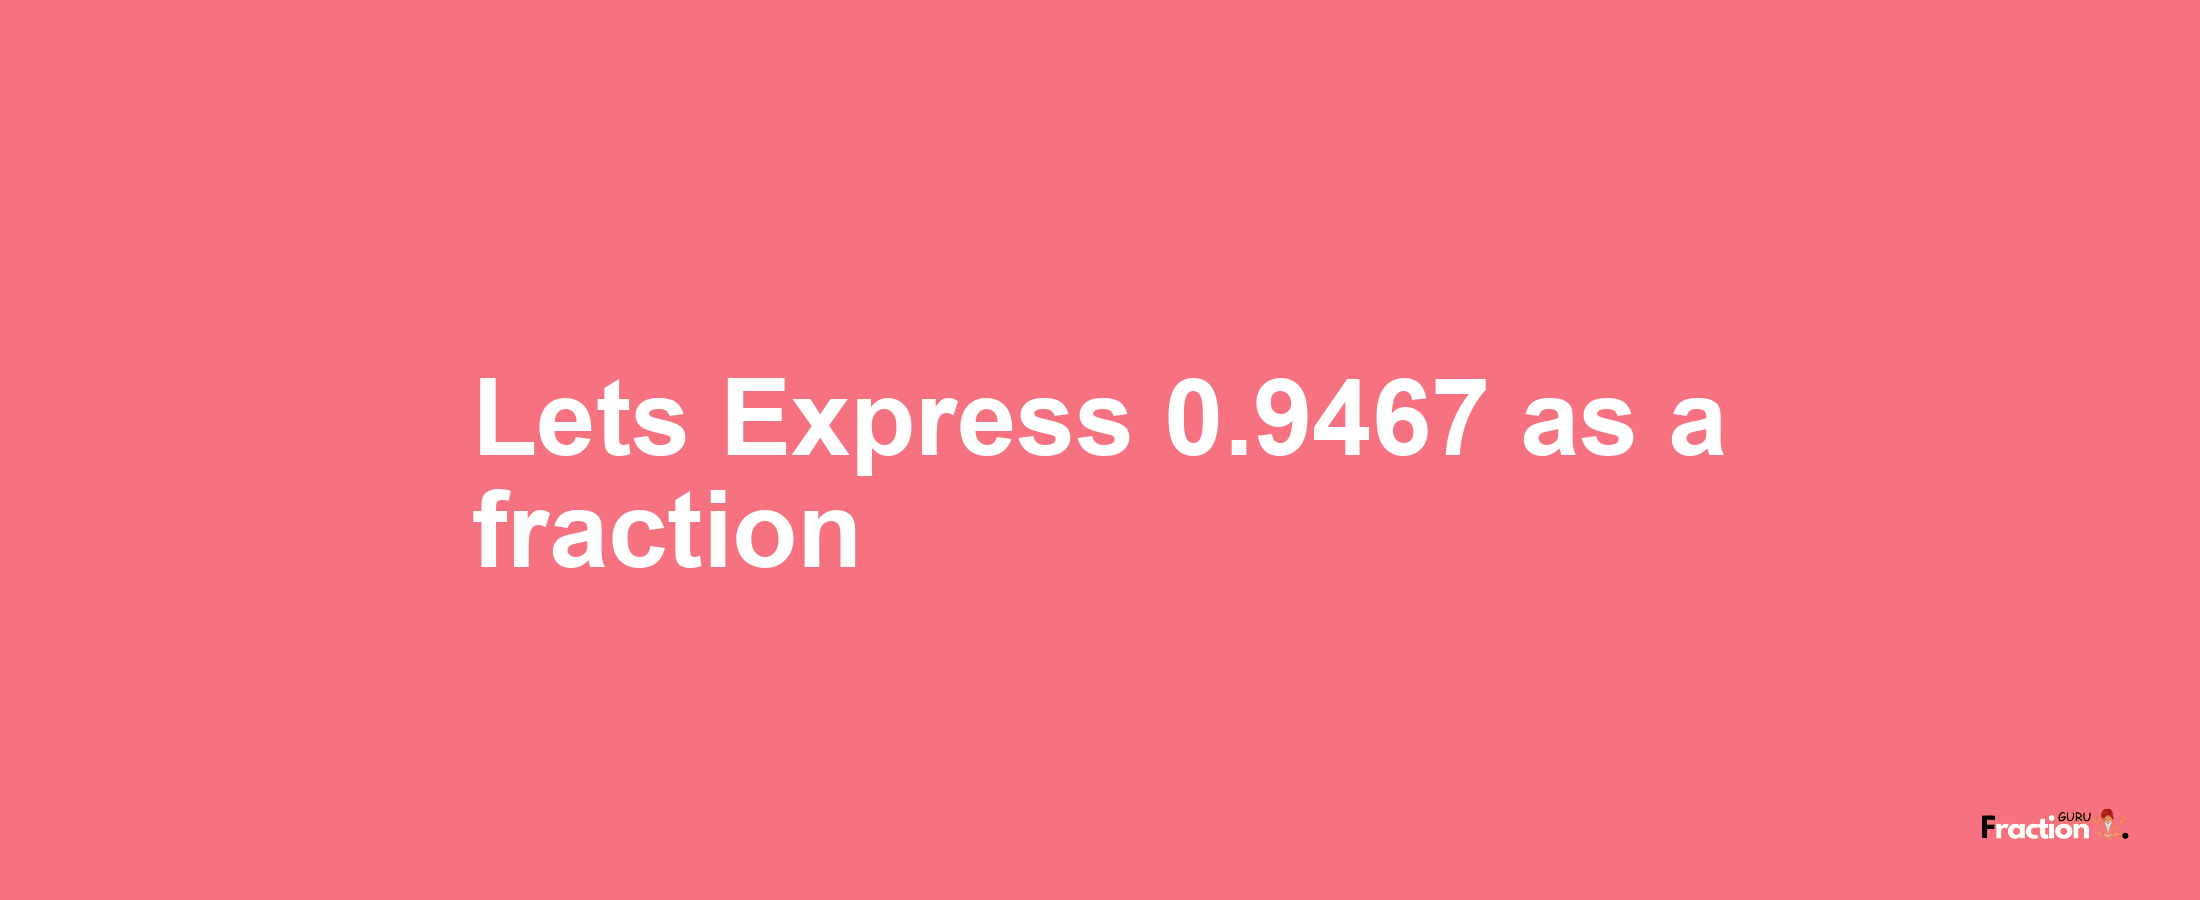 Lets Express 0.9467 as afraction